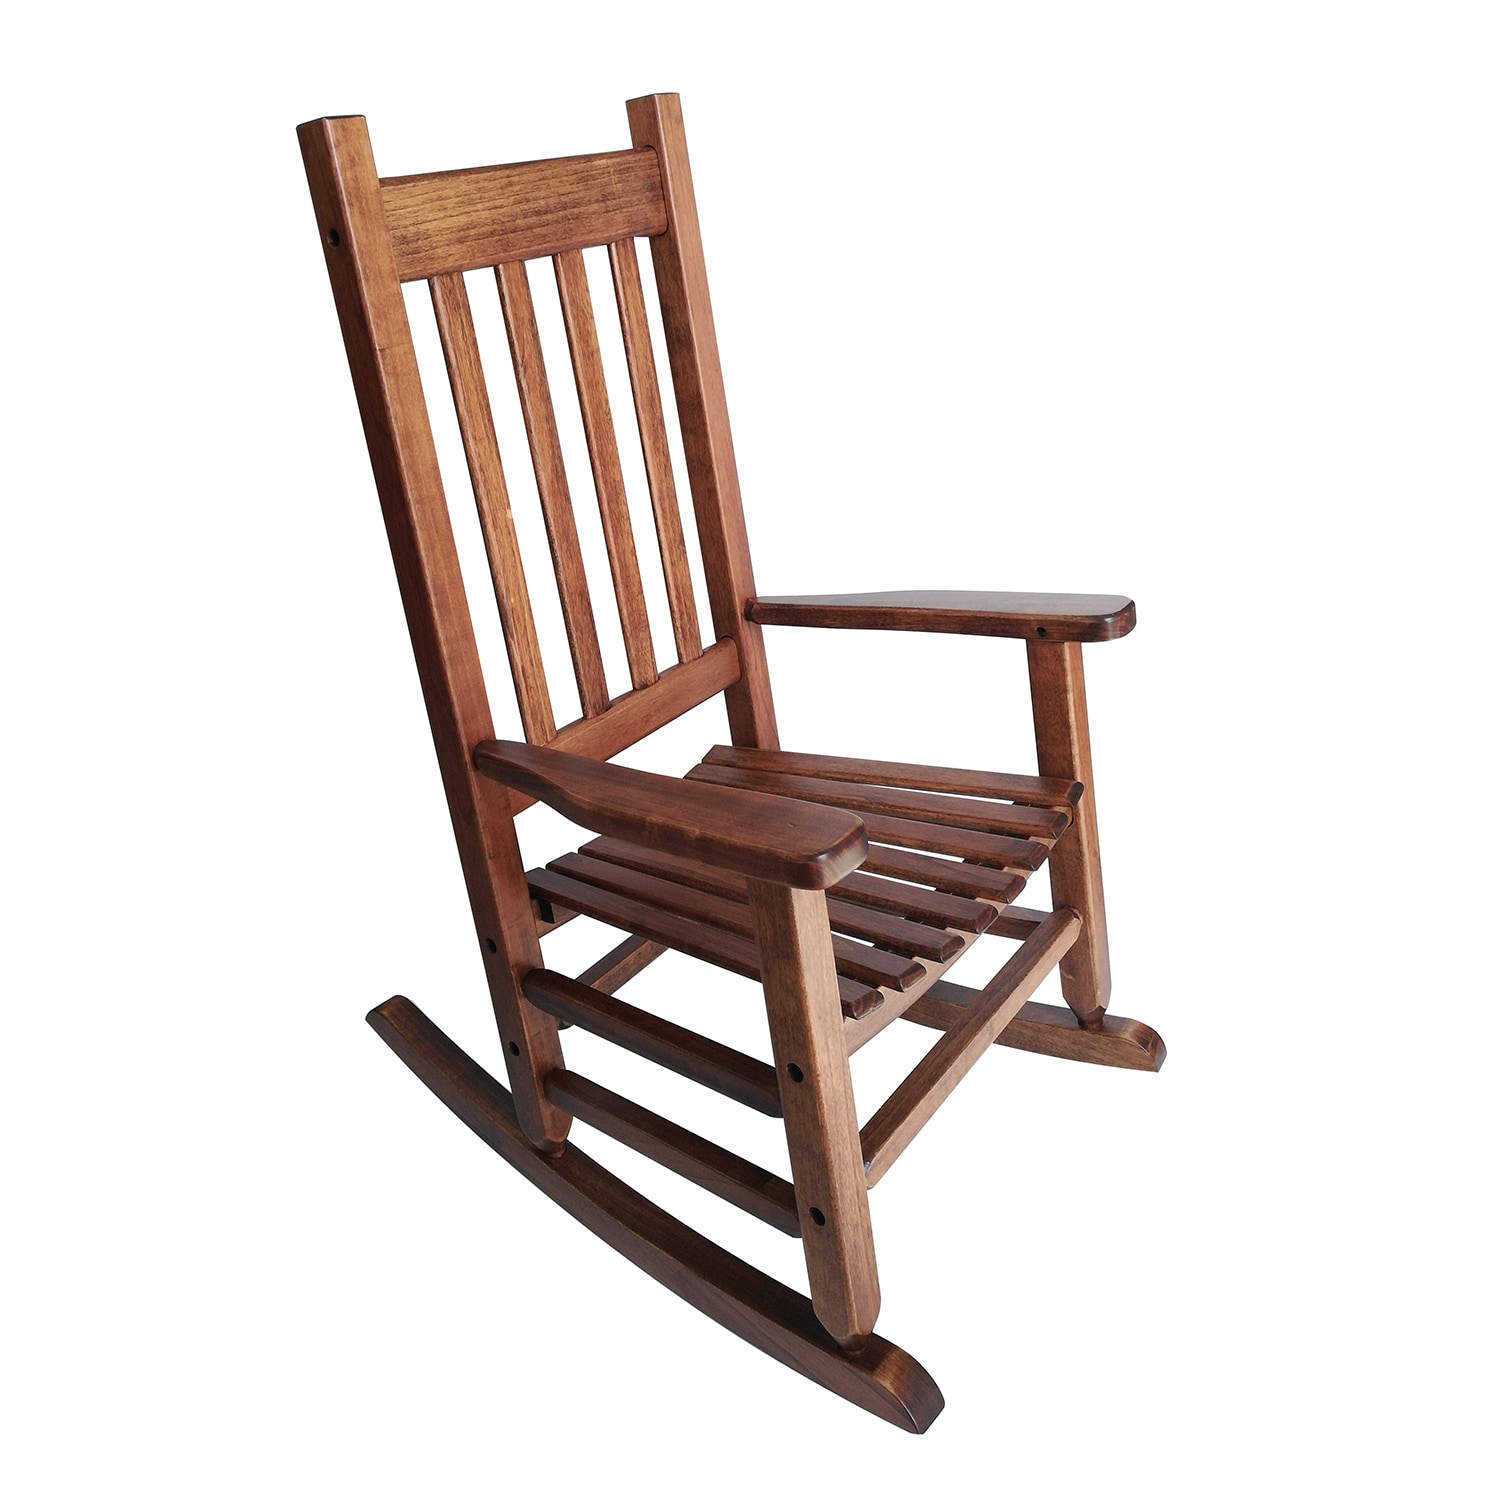 FORCLOVER Rocker Natural Wood High Back Single Rocking Chair